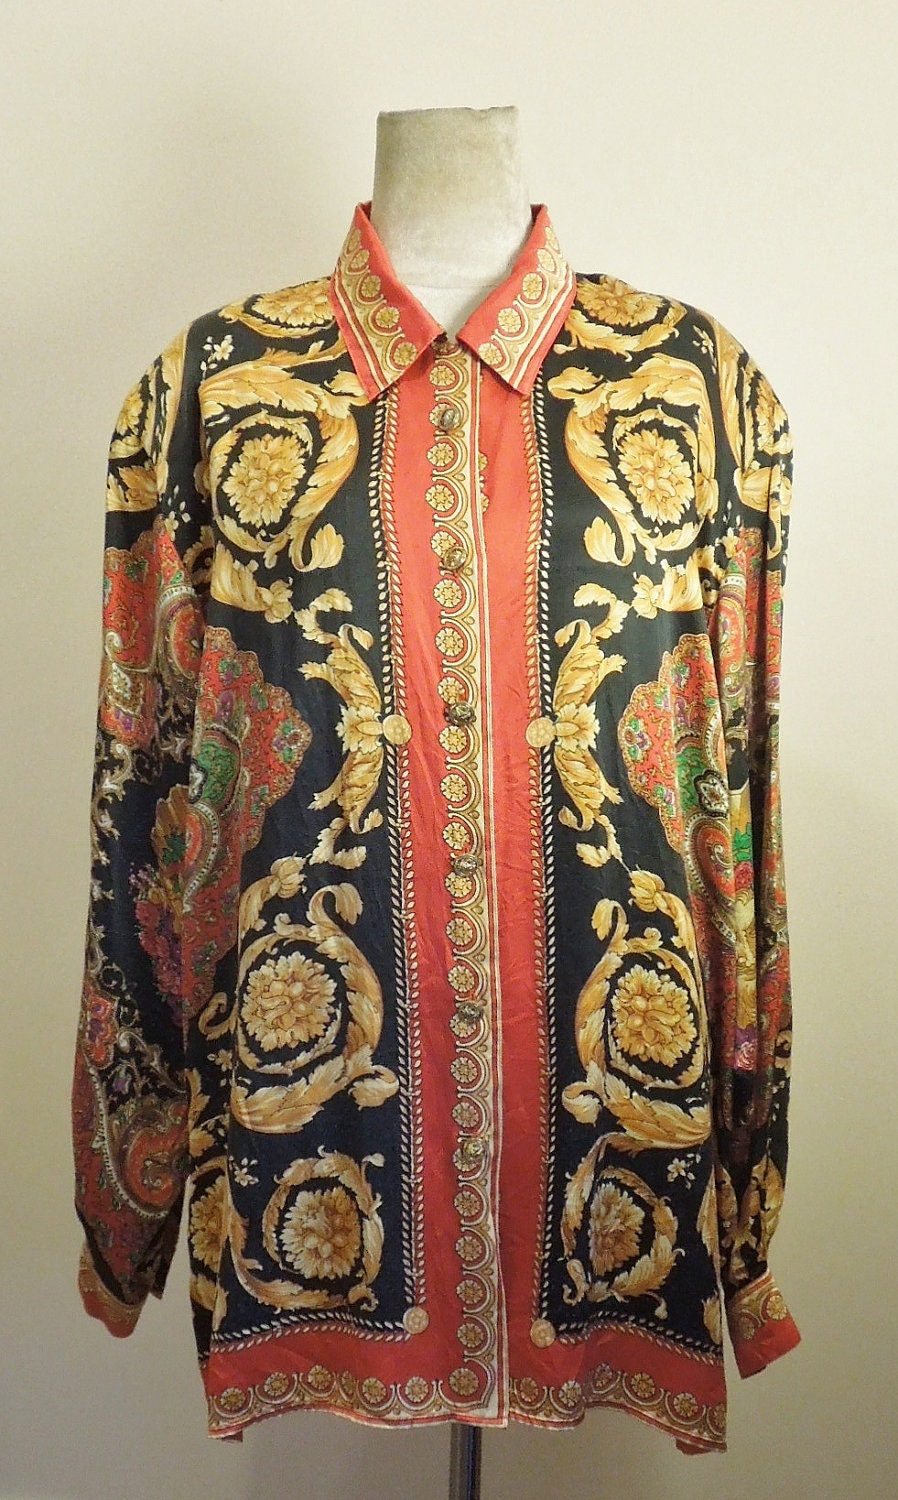 Vintage GIANNI VERSACE Inspired Silk Shirt with